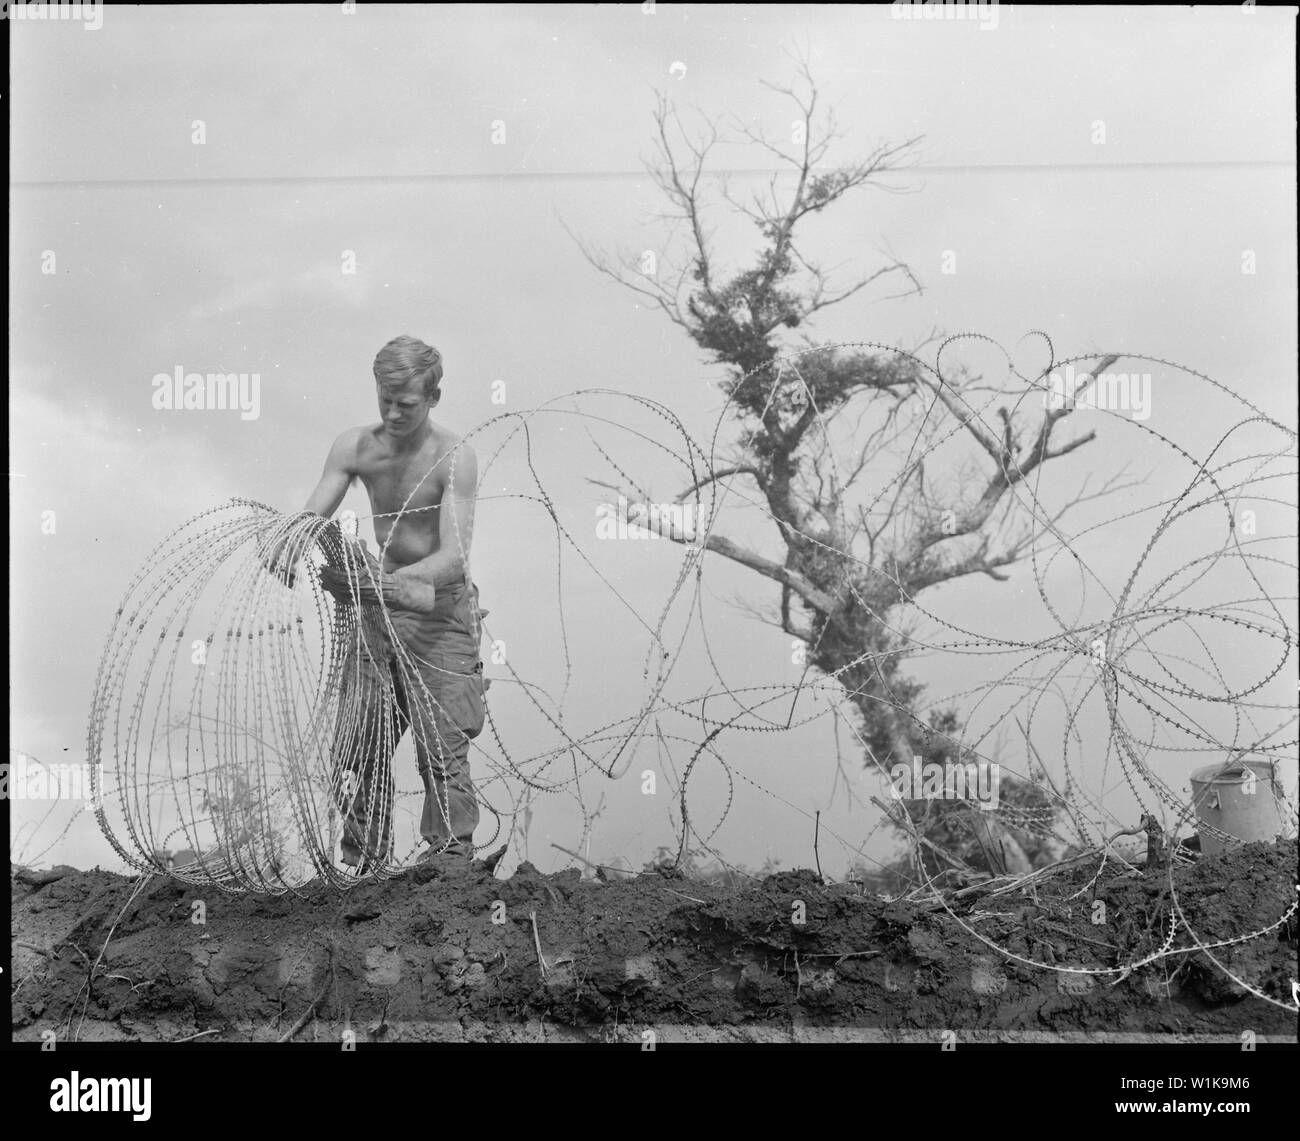 Vietnam....A member of the 1st Brigade, 5th Infantry Division (Mechanized), takes down barbed tape (a modified form of concertina wire) surrounding the command post of Operation Utah Mesa in the A Shau Valley. Stock Photo